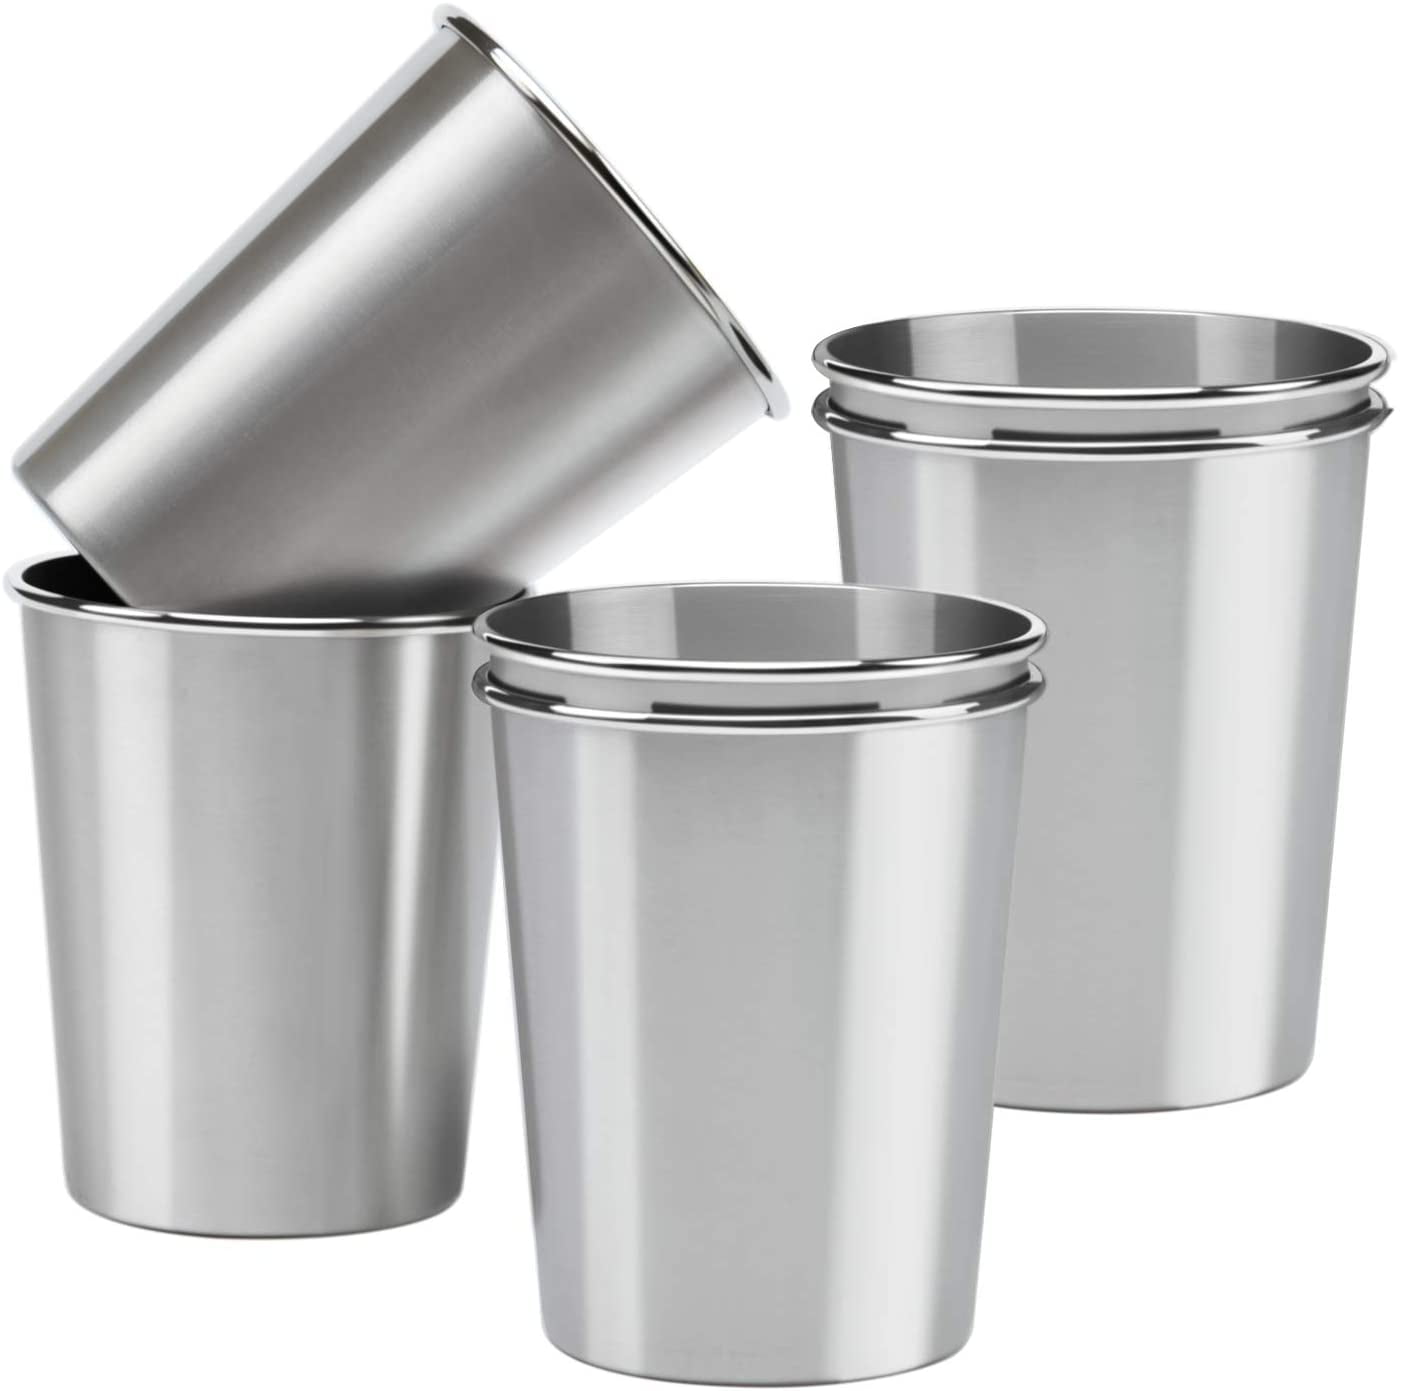 Blue Ruisita 6 Pack 8 Ounce Stainless Steel Cups Shatterproof Pint Drinking Cups Metal Drinking Glasses for Kids and Adults 